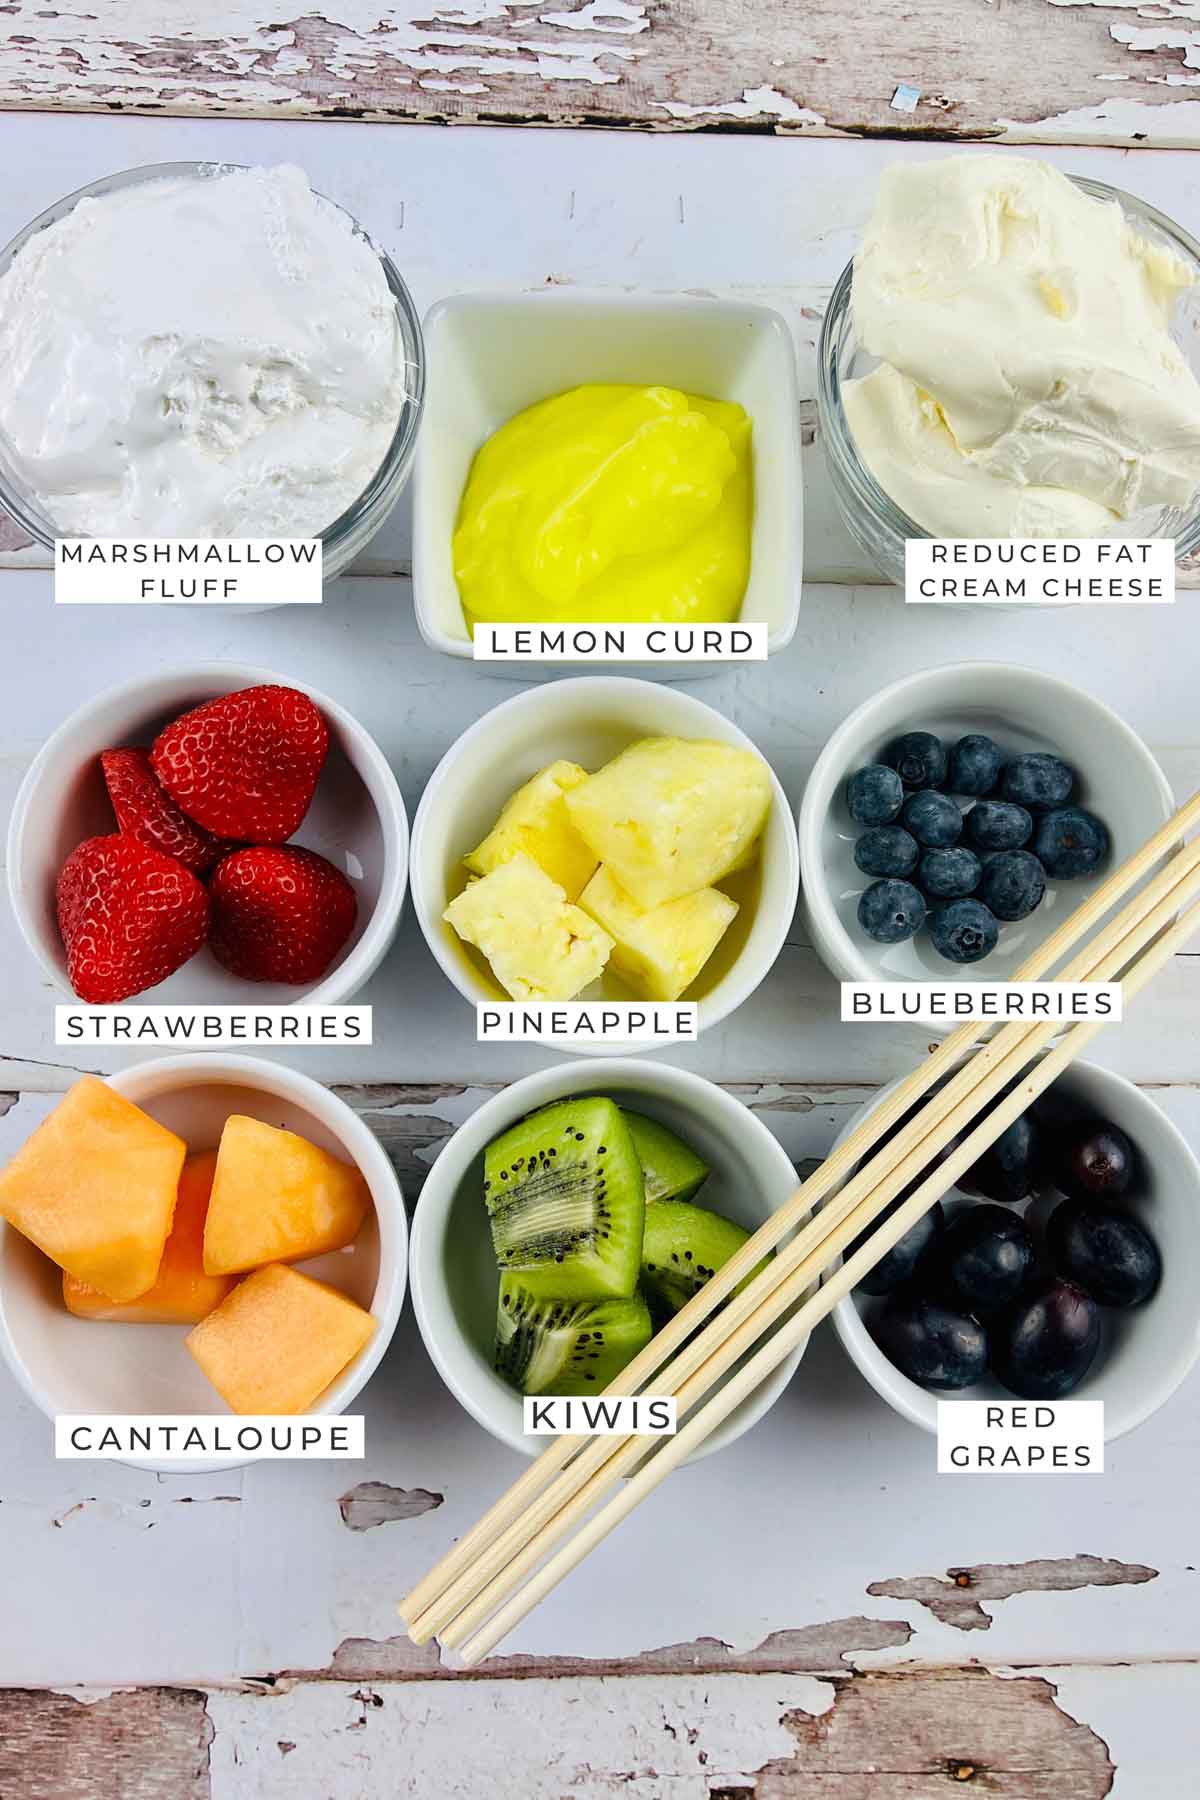 Labeled ingredients for the fruit skewers.